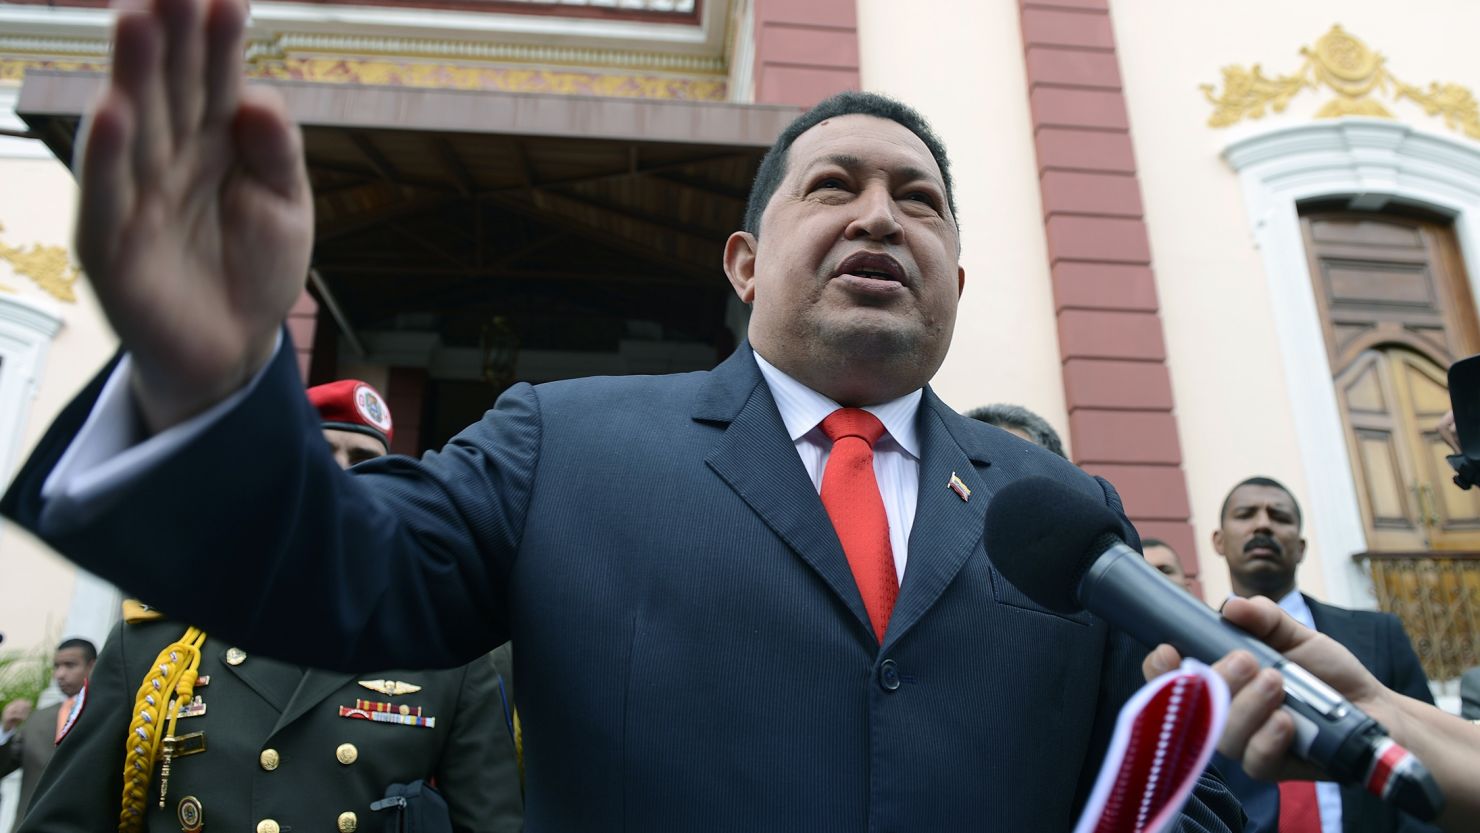 Venezuelan President Hugo Chavez said the man was detained while trying to cross the border from Colombia into Venezuela.